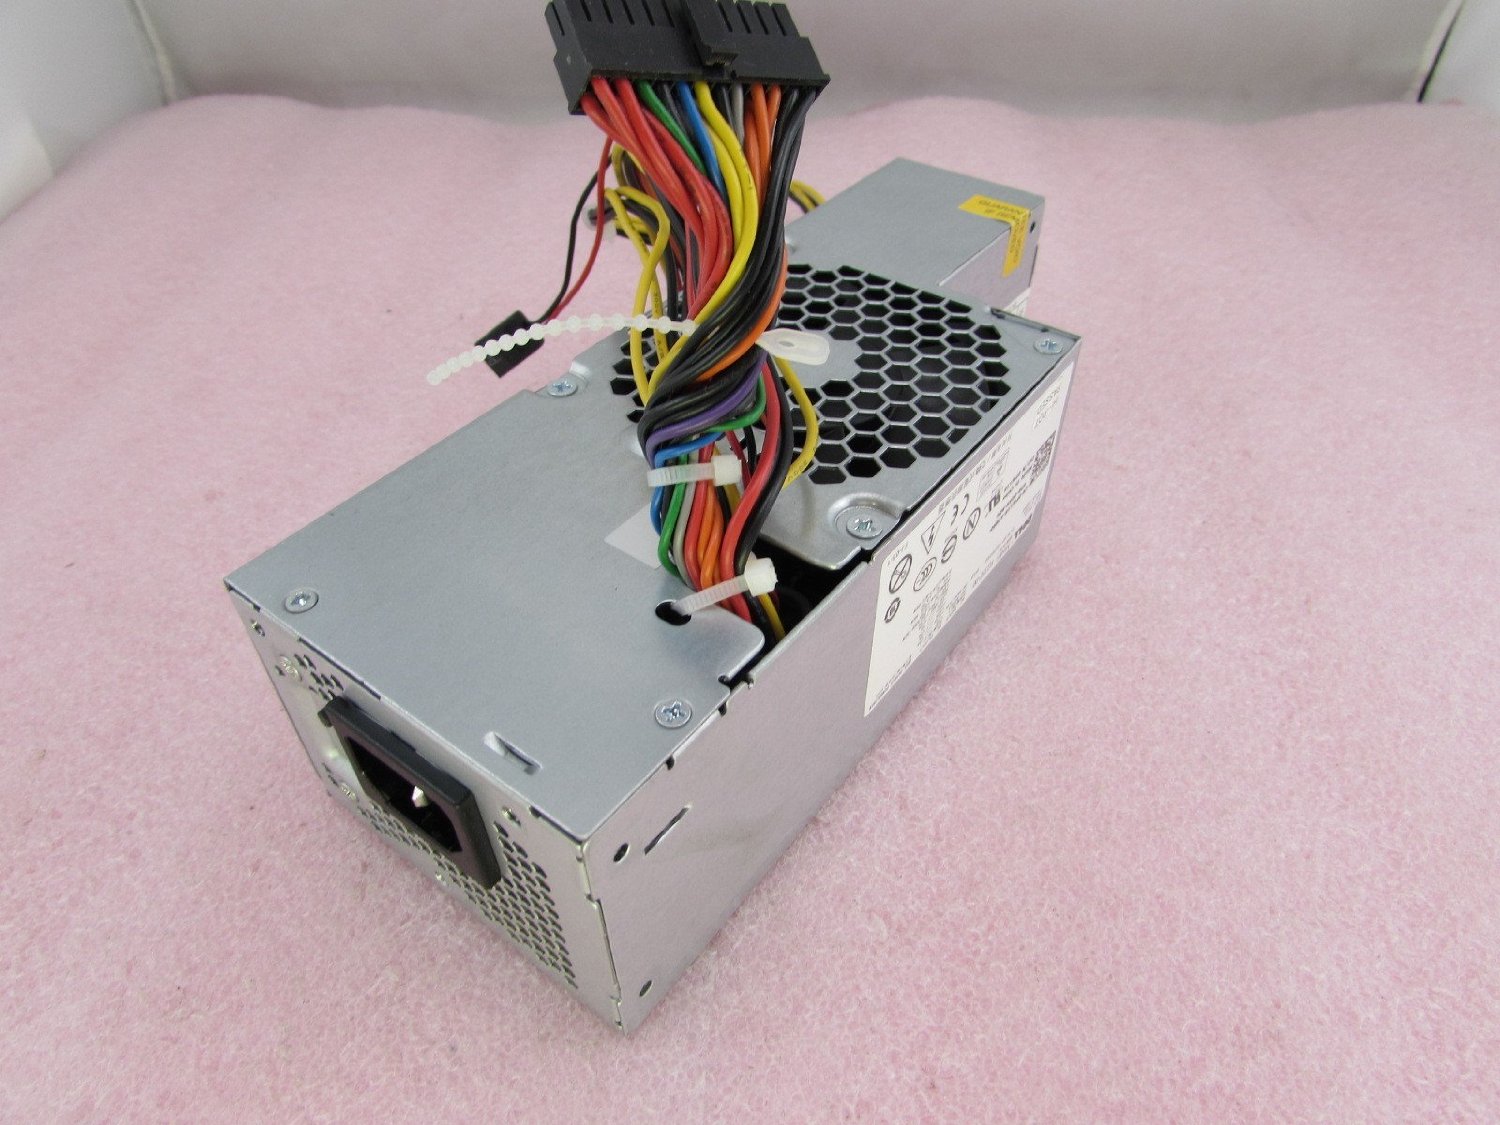 Genuine DELL 235w Power Supply For Optiplex 760, 780 and 960 Small Form Factor Systems